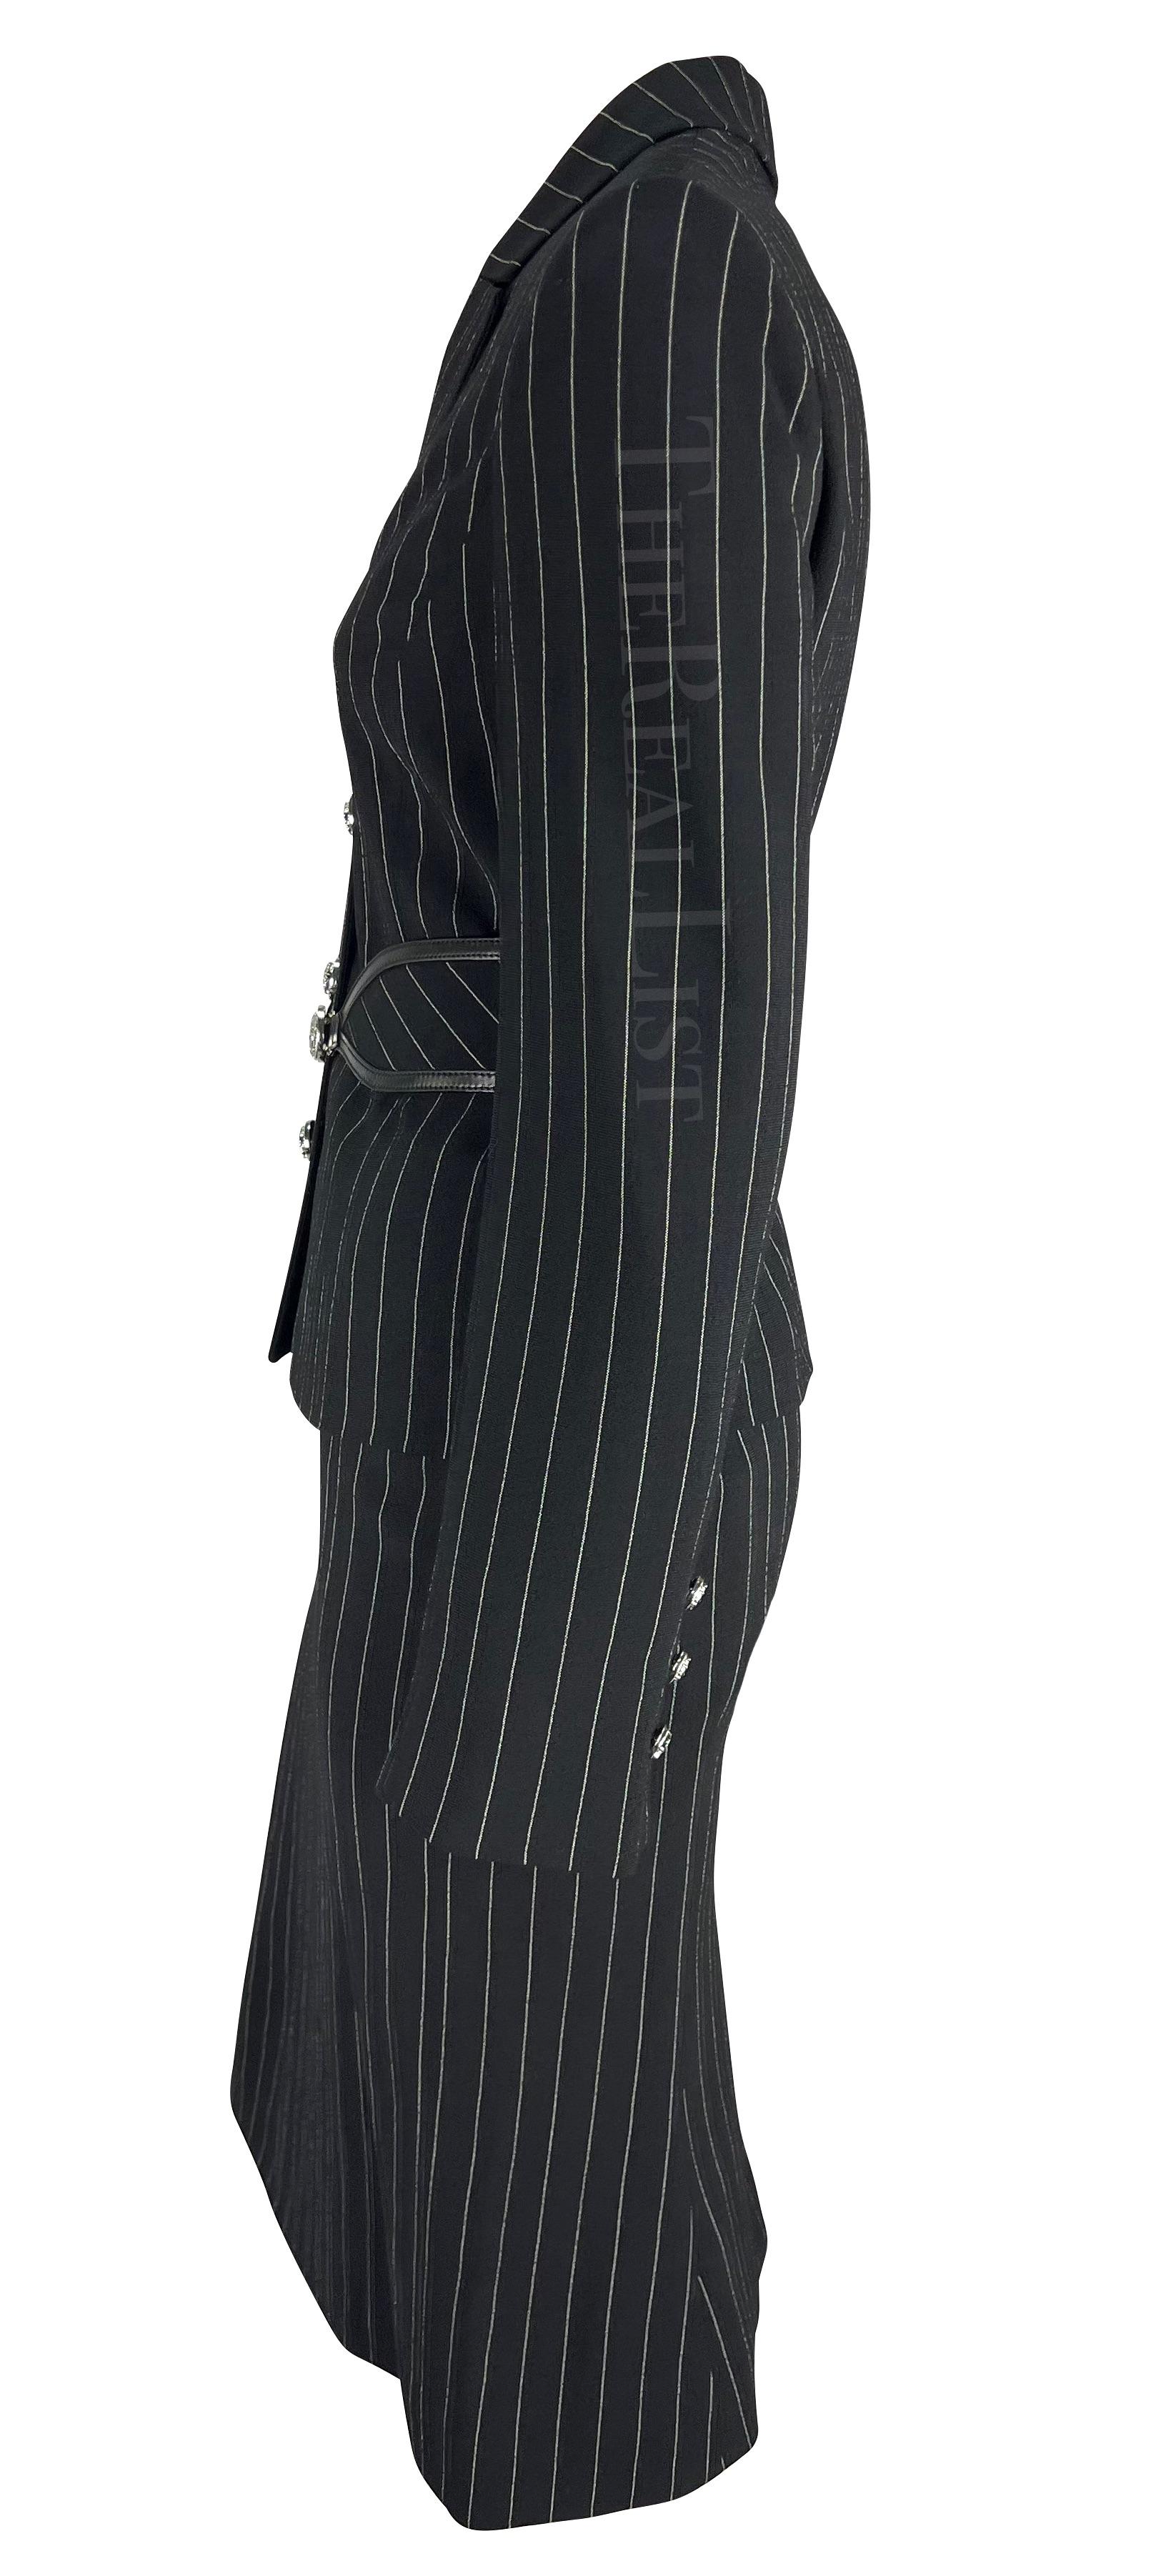 NWT F/W 2004 Versace by Donatella Black Wool Blend Pinstripe Medusa Belted Suit For Sale 1